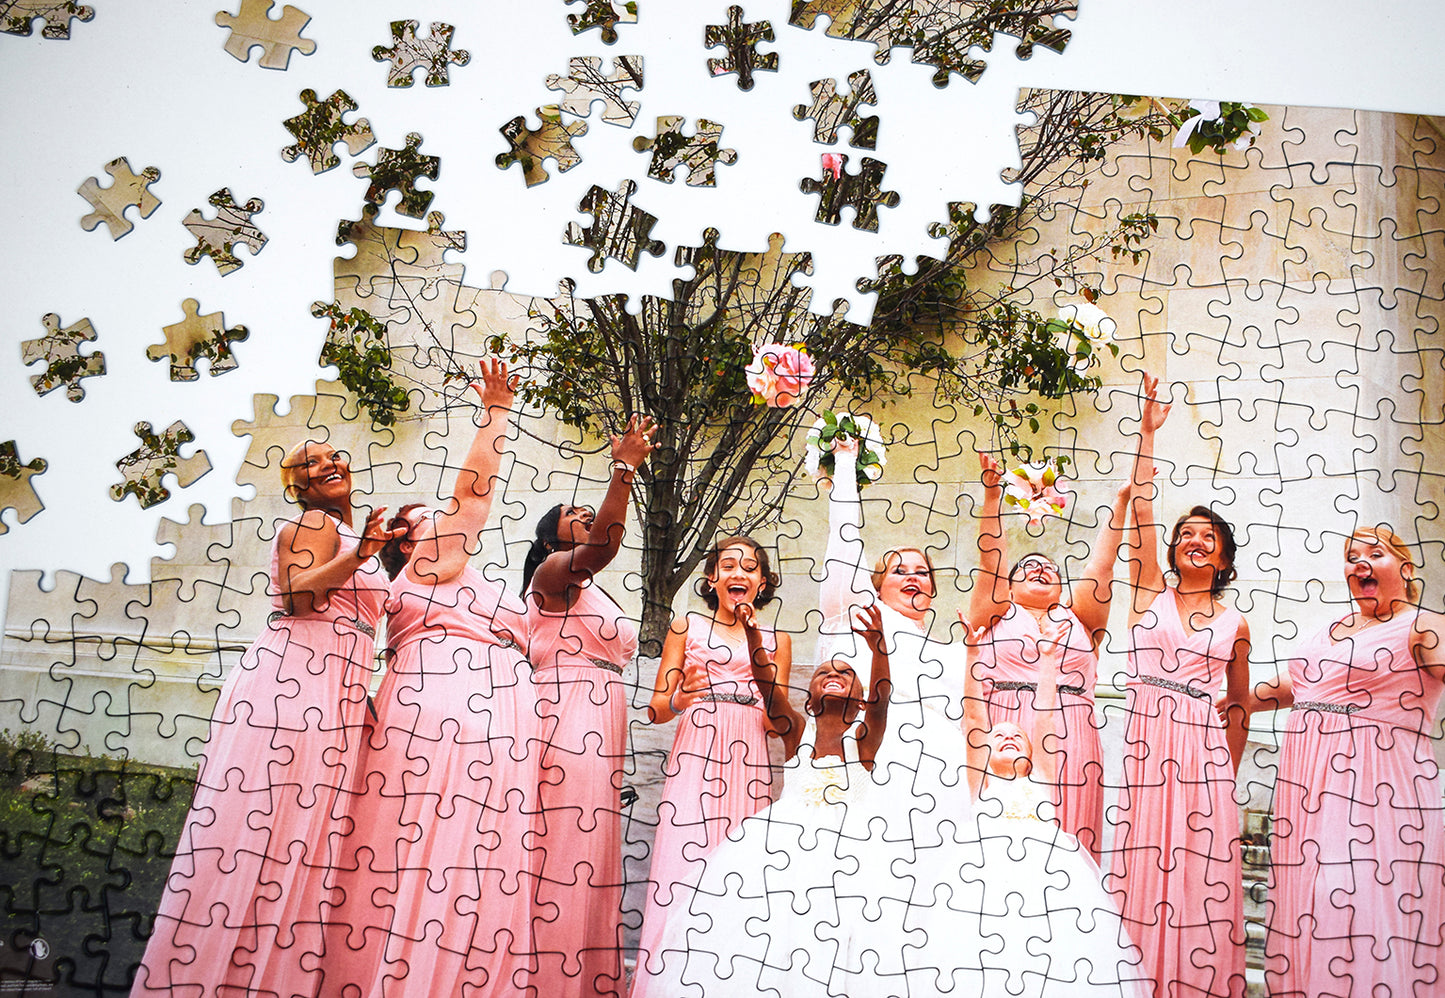 Personalised 400 Piece Photo Jigsaw Puzzle